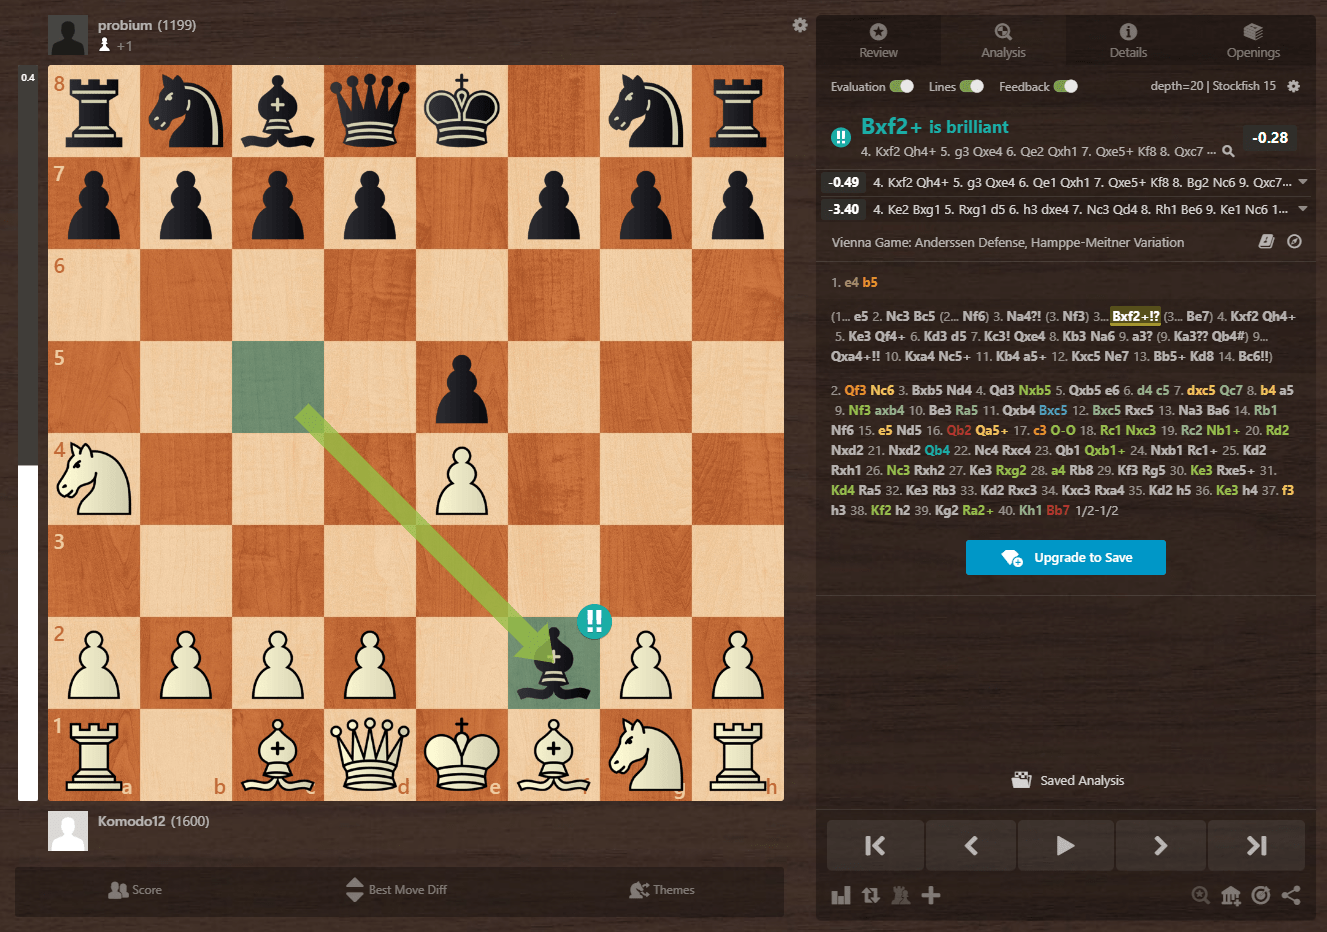 Difficult to spot mate in 3 in my game today : r/chess